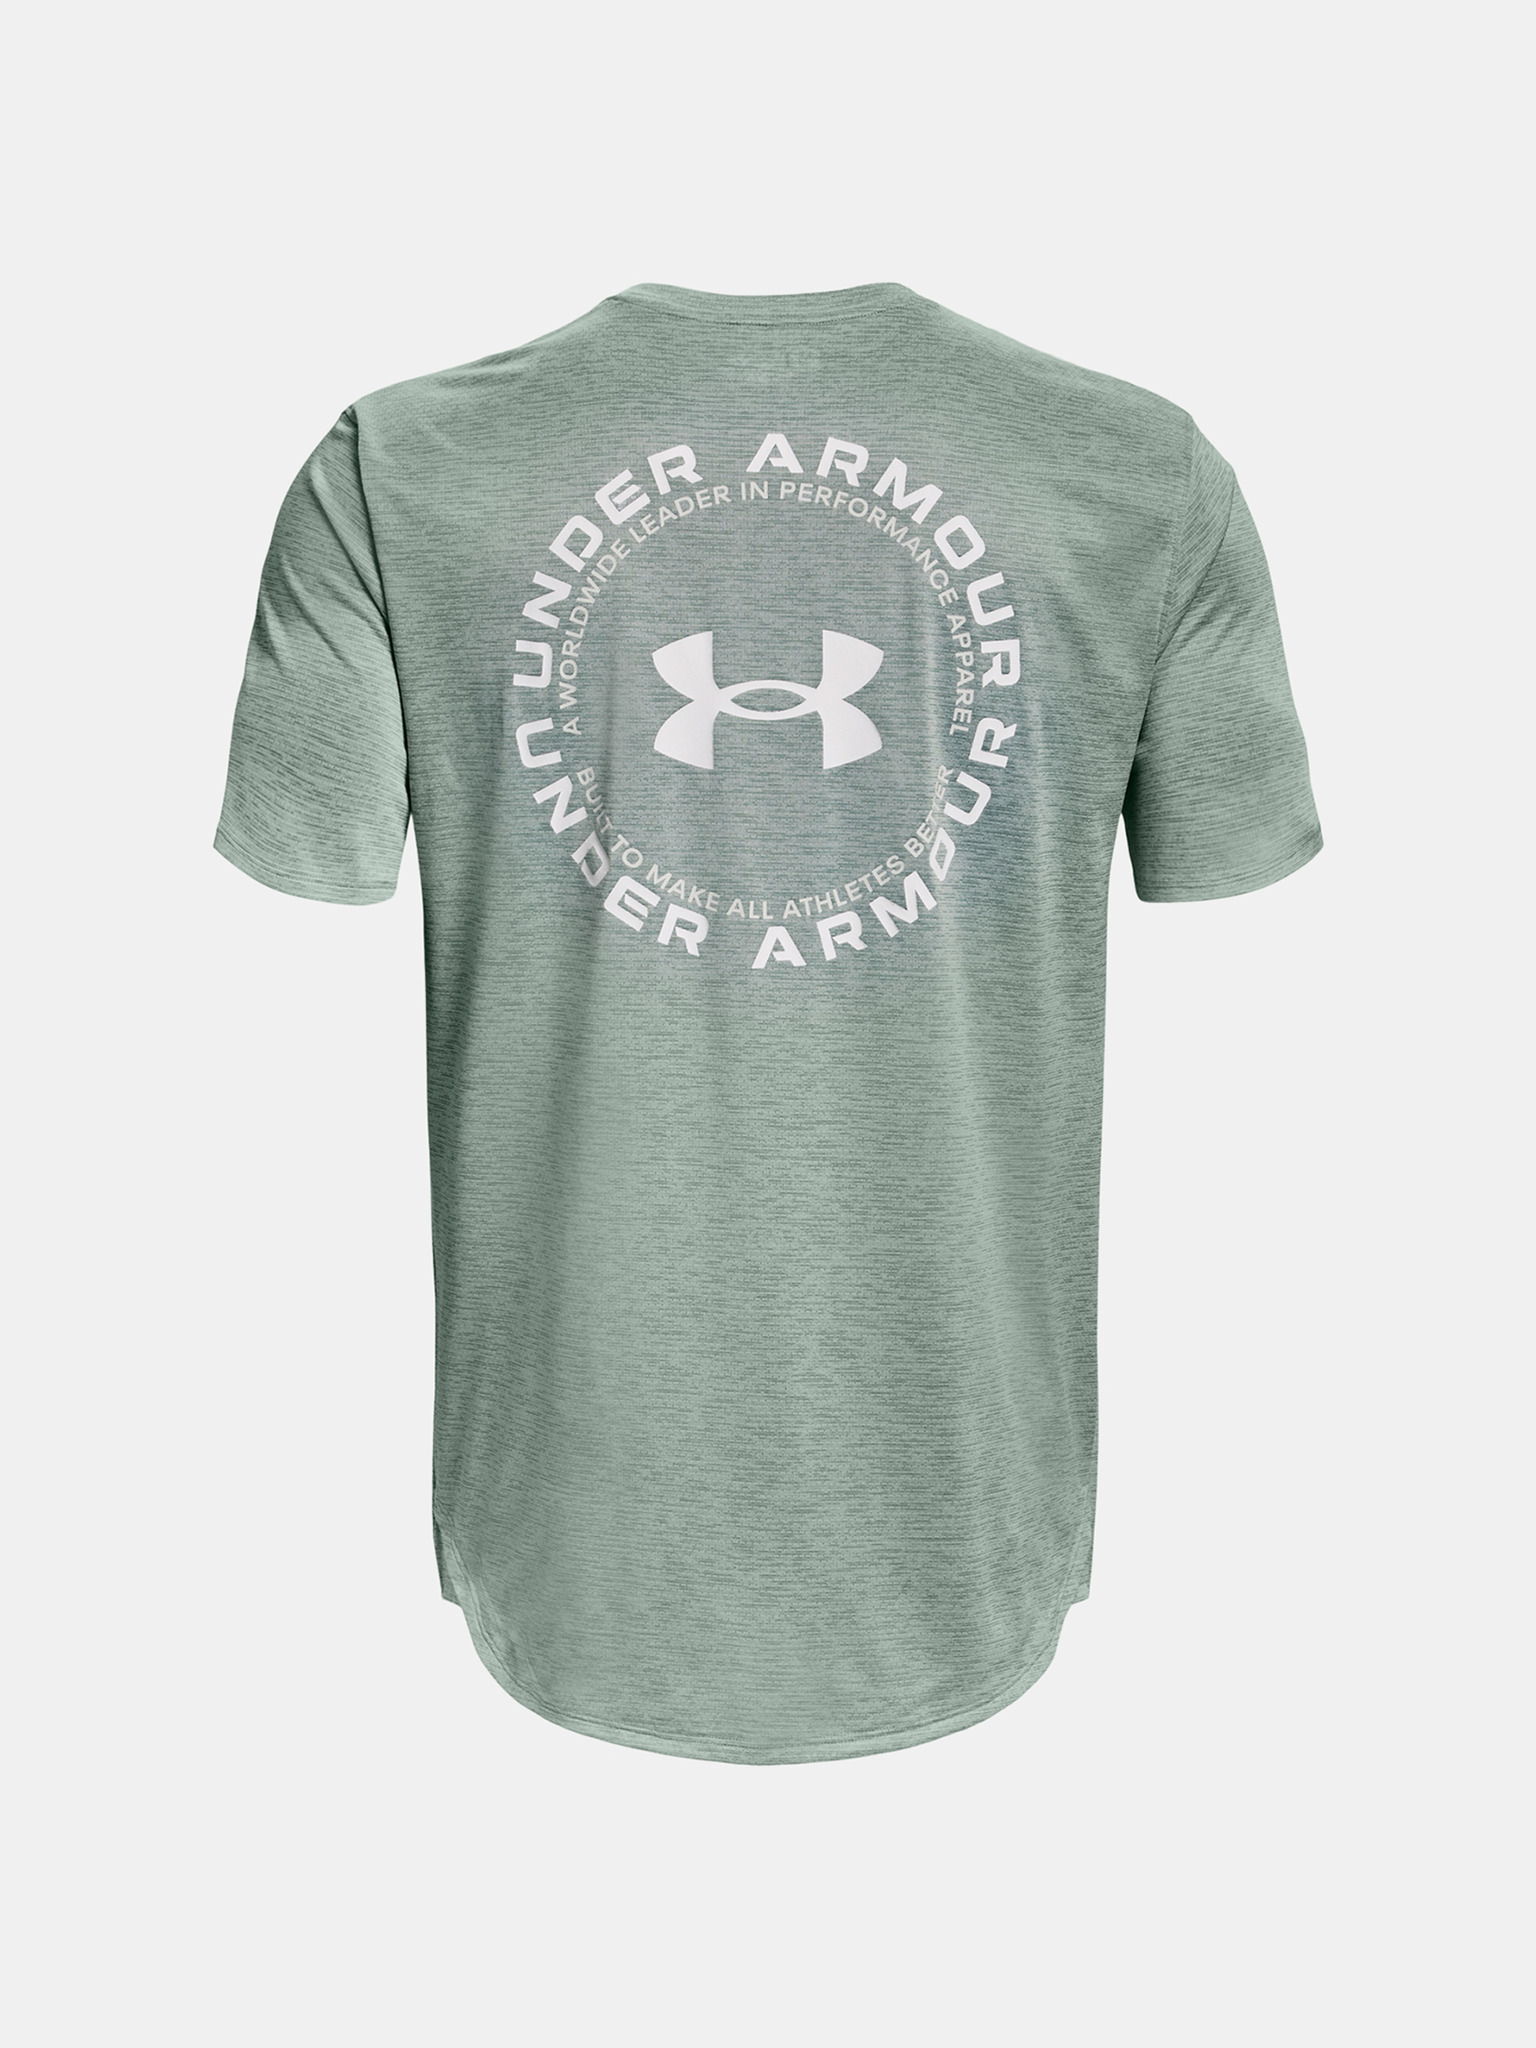 Under Armour Kids Sportstyle Logo Printed Tee Grey L